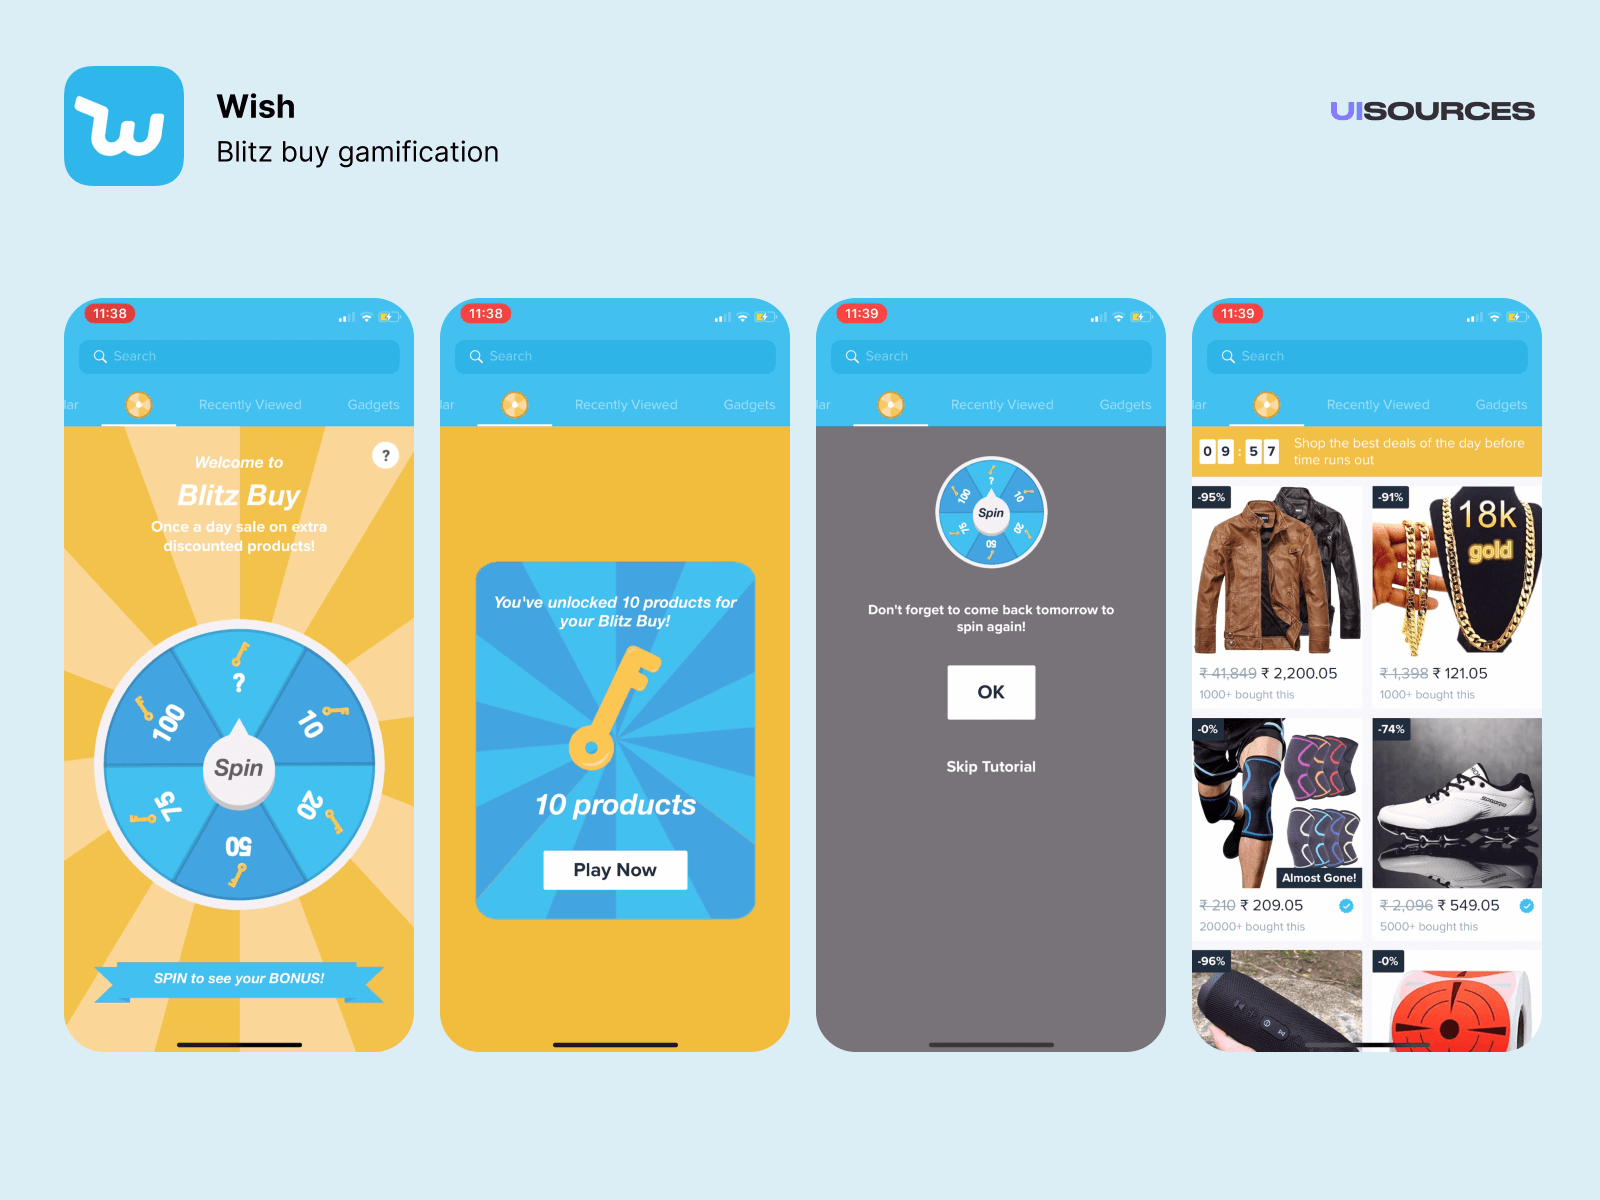 Wish Launches Marketing Blitz to Reintroduce Itself to Consumers - Retail TouchPoints